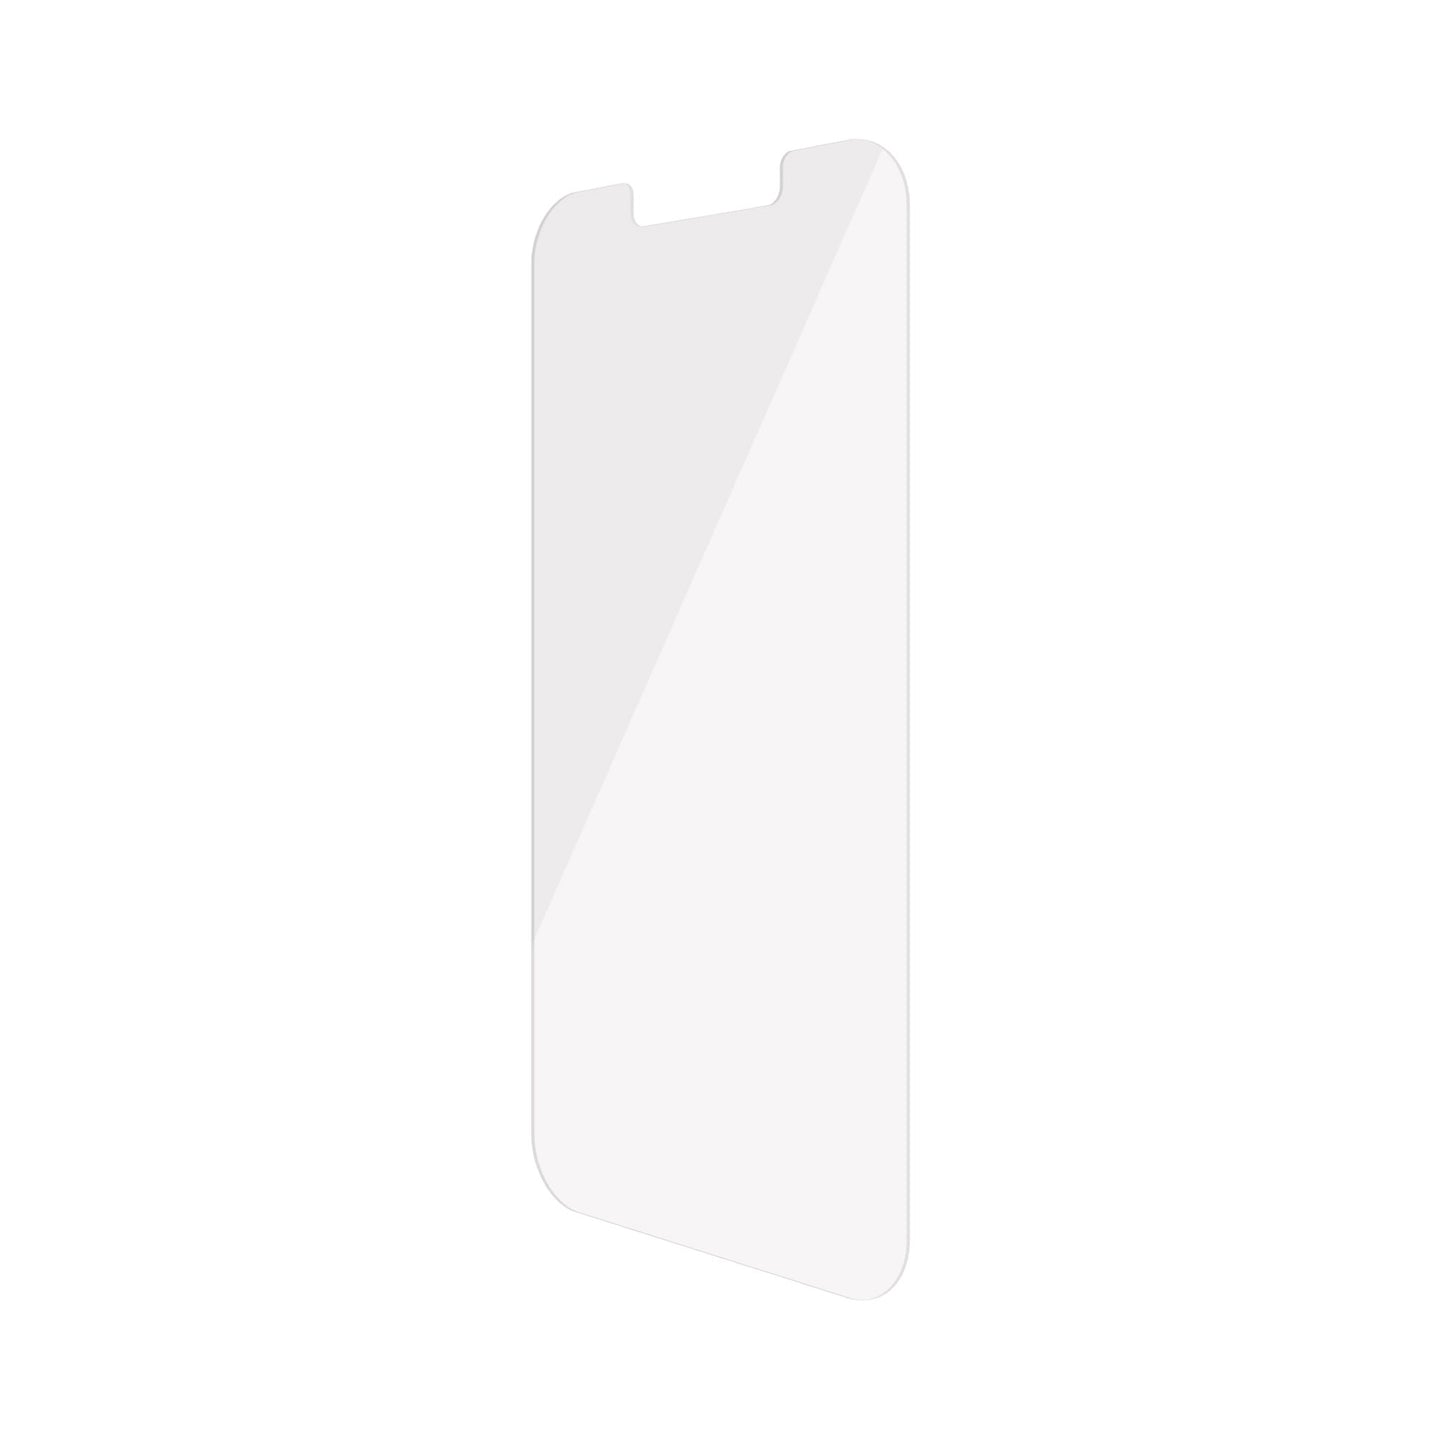 PANZERGLASS Standard Fit for iPhone 13 / 13 Pro - Clear